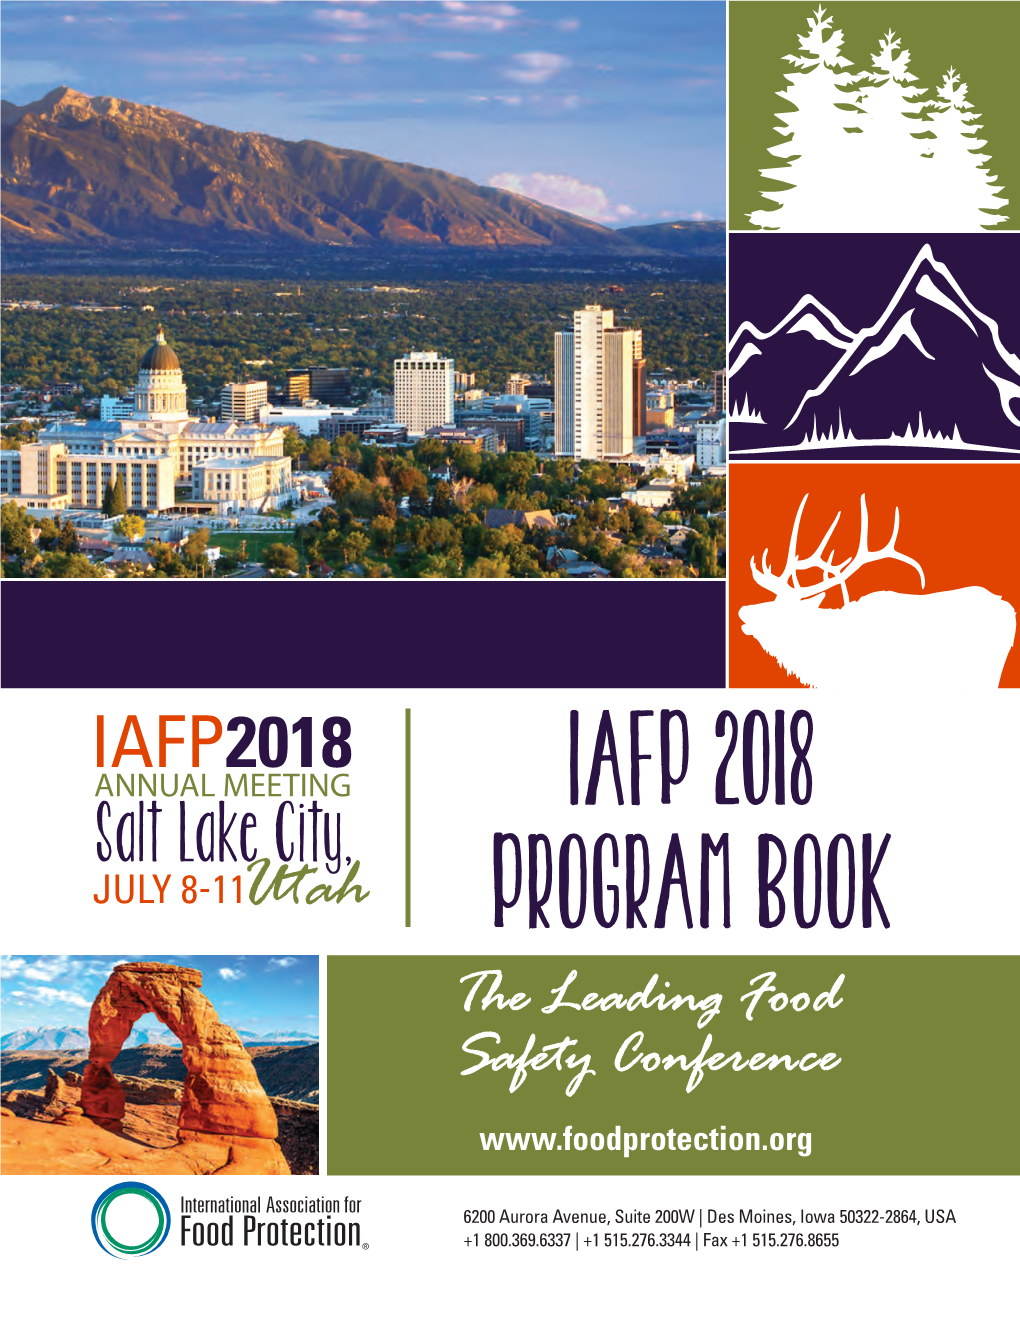 IAFP 2018 PROGRAM BOOK the Leading Food Safety Conference